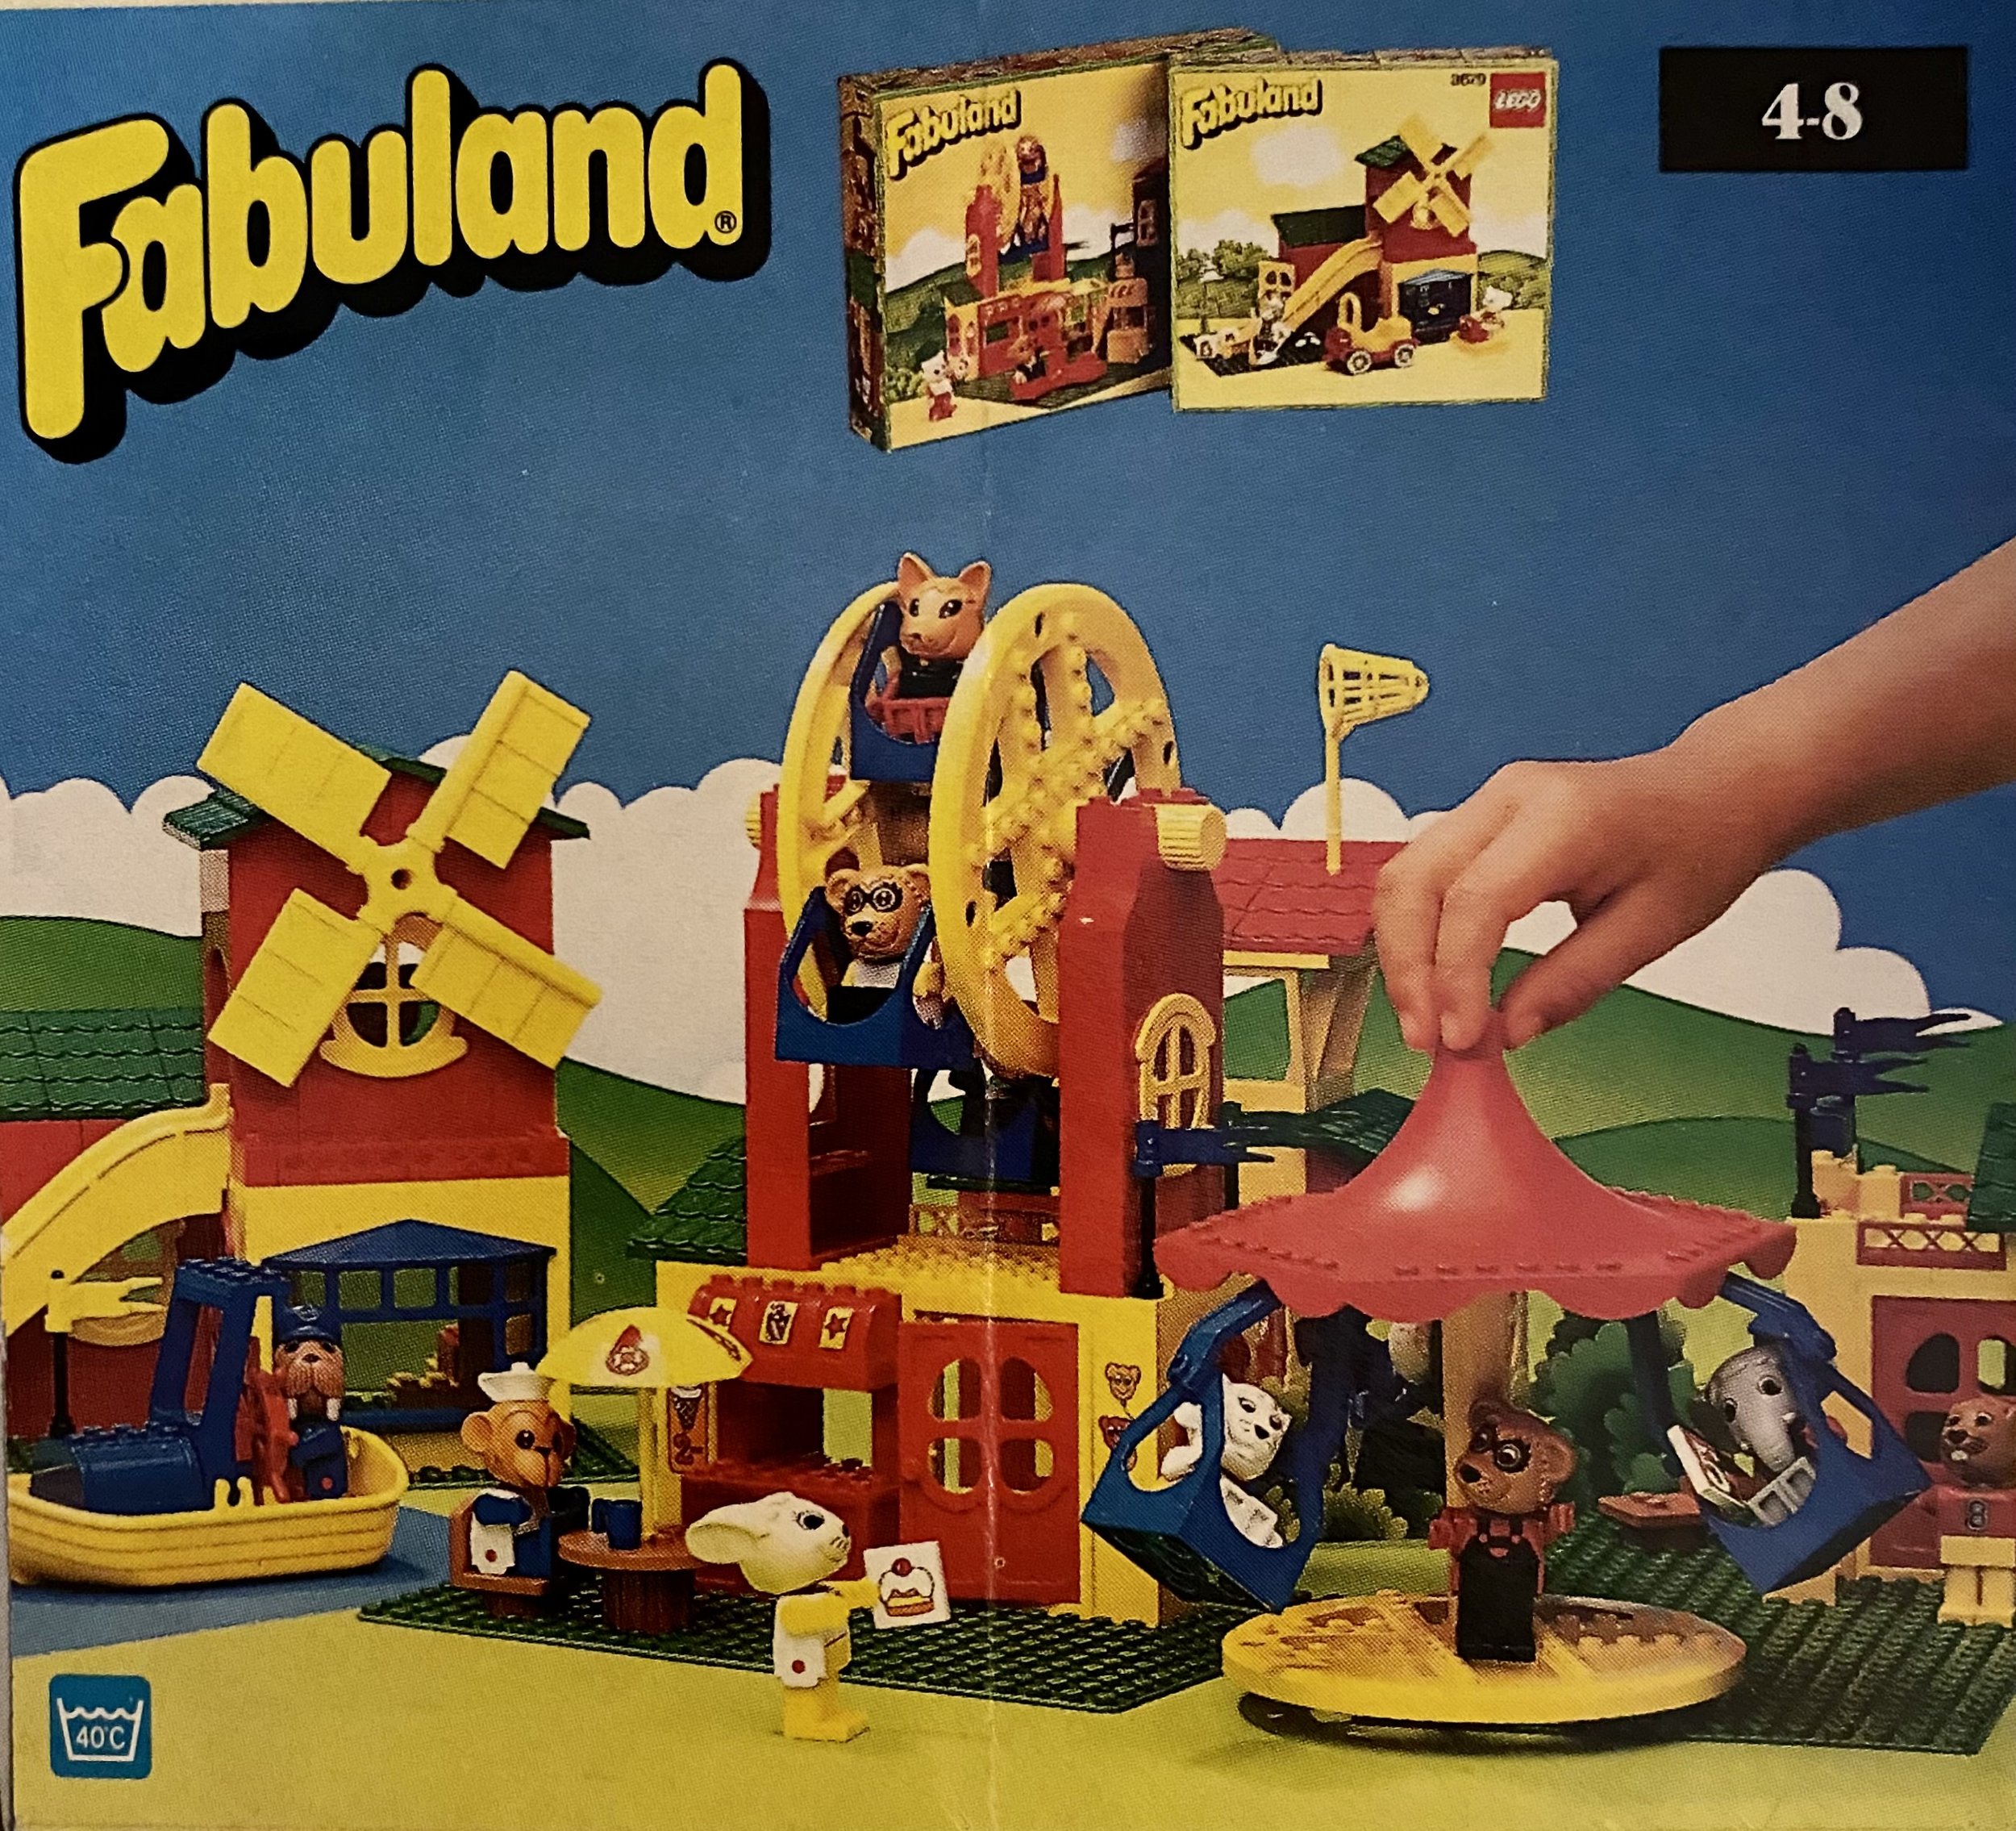 Everything You Want To About LEGO Fabuland - BrickNerd - All things LEGO and the LEGO fan community